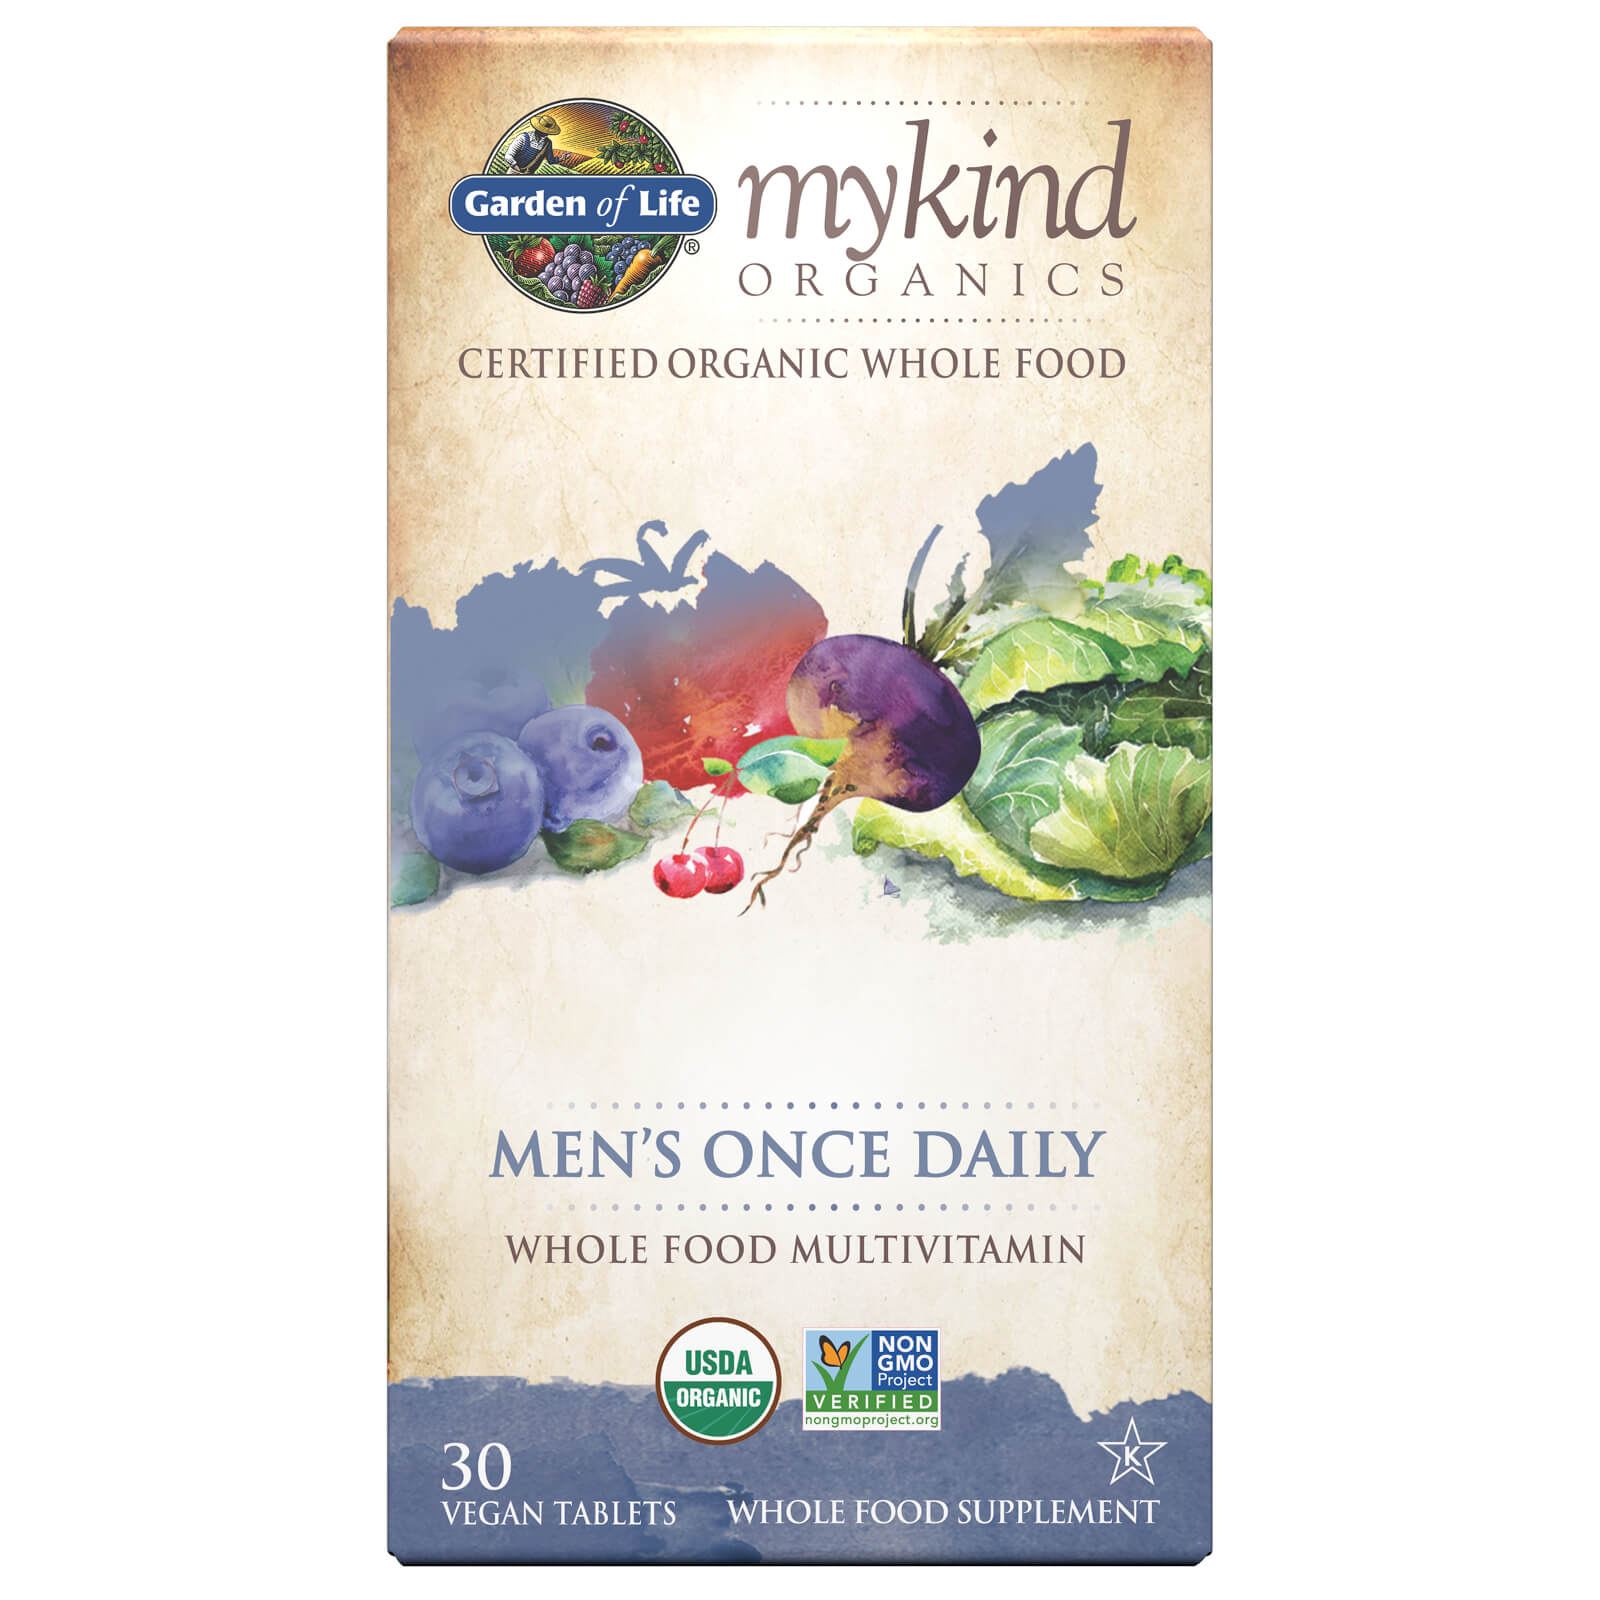 mykind Organics Men's Once Daily - 30 Tablets